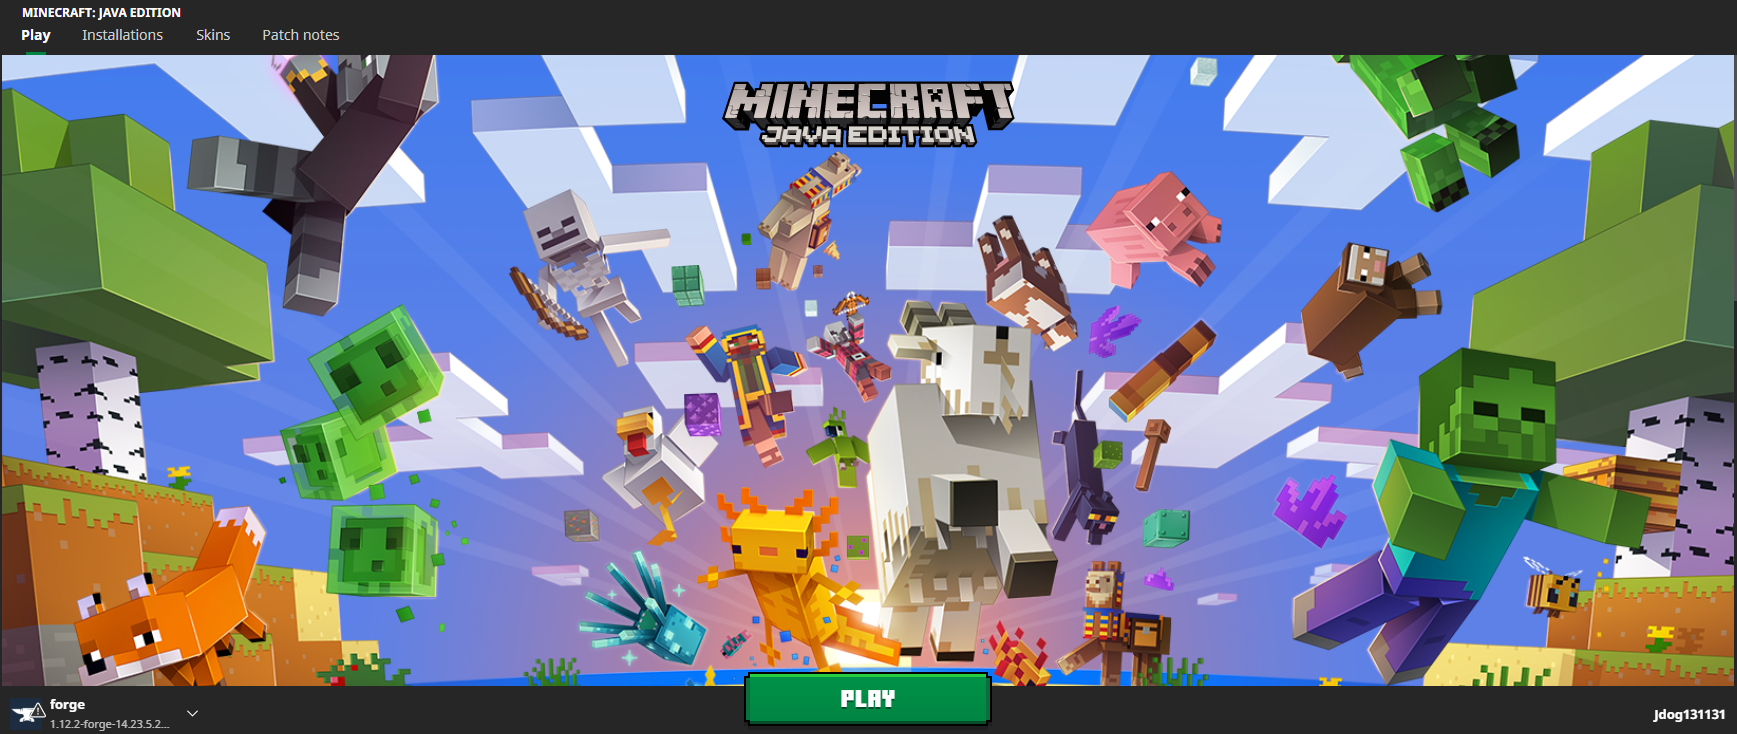 minecraft launcher could not load launcher core